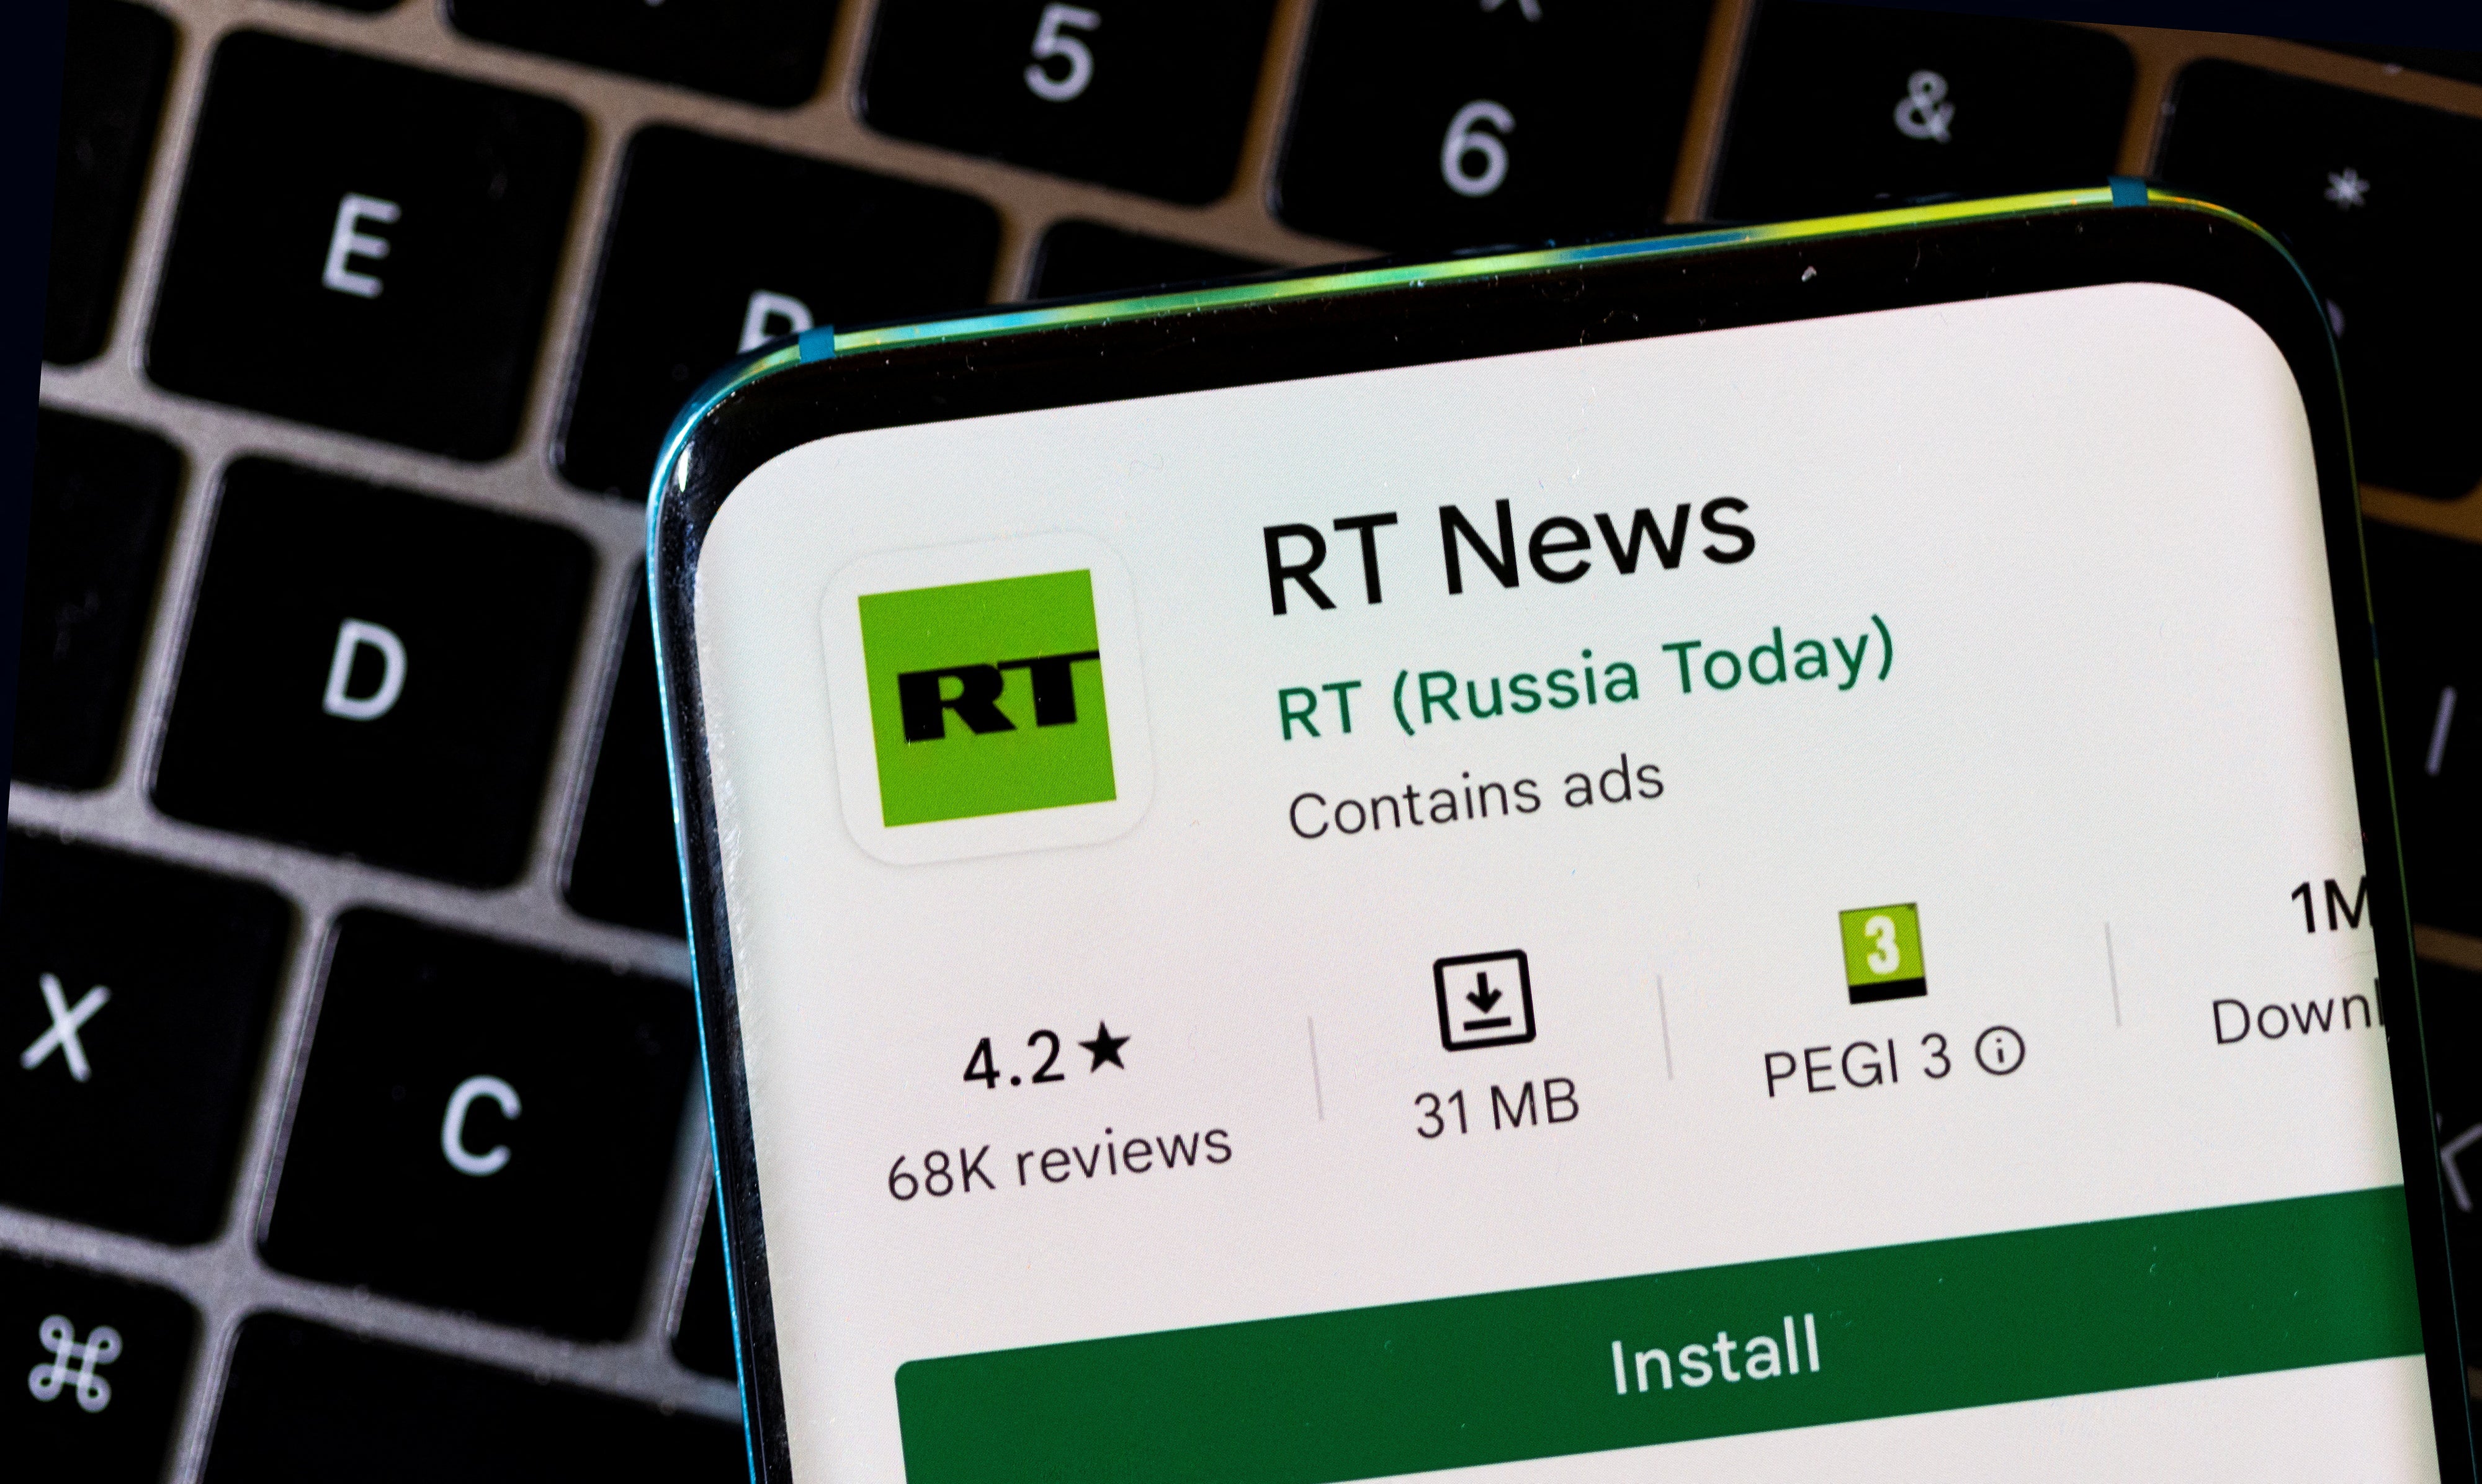 RT is a Russian state-owned TV network used as a mouthpiece for Putin’s propaganda